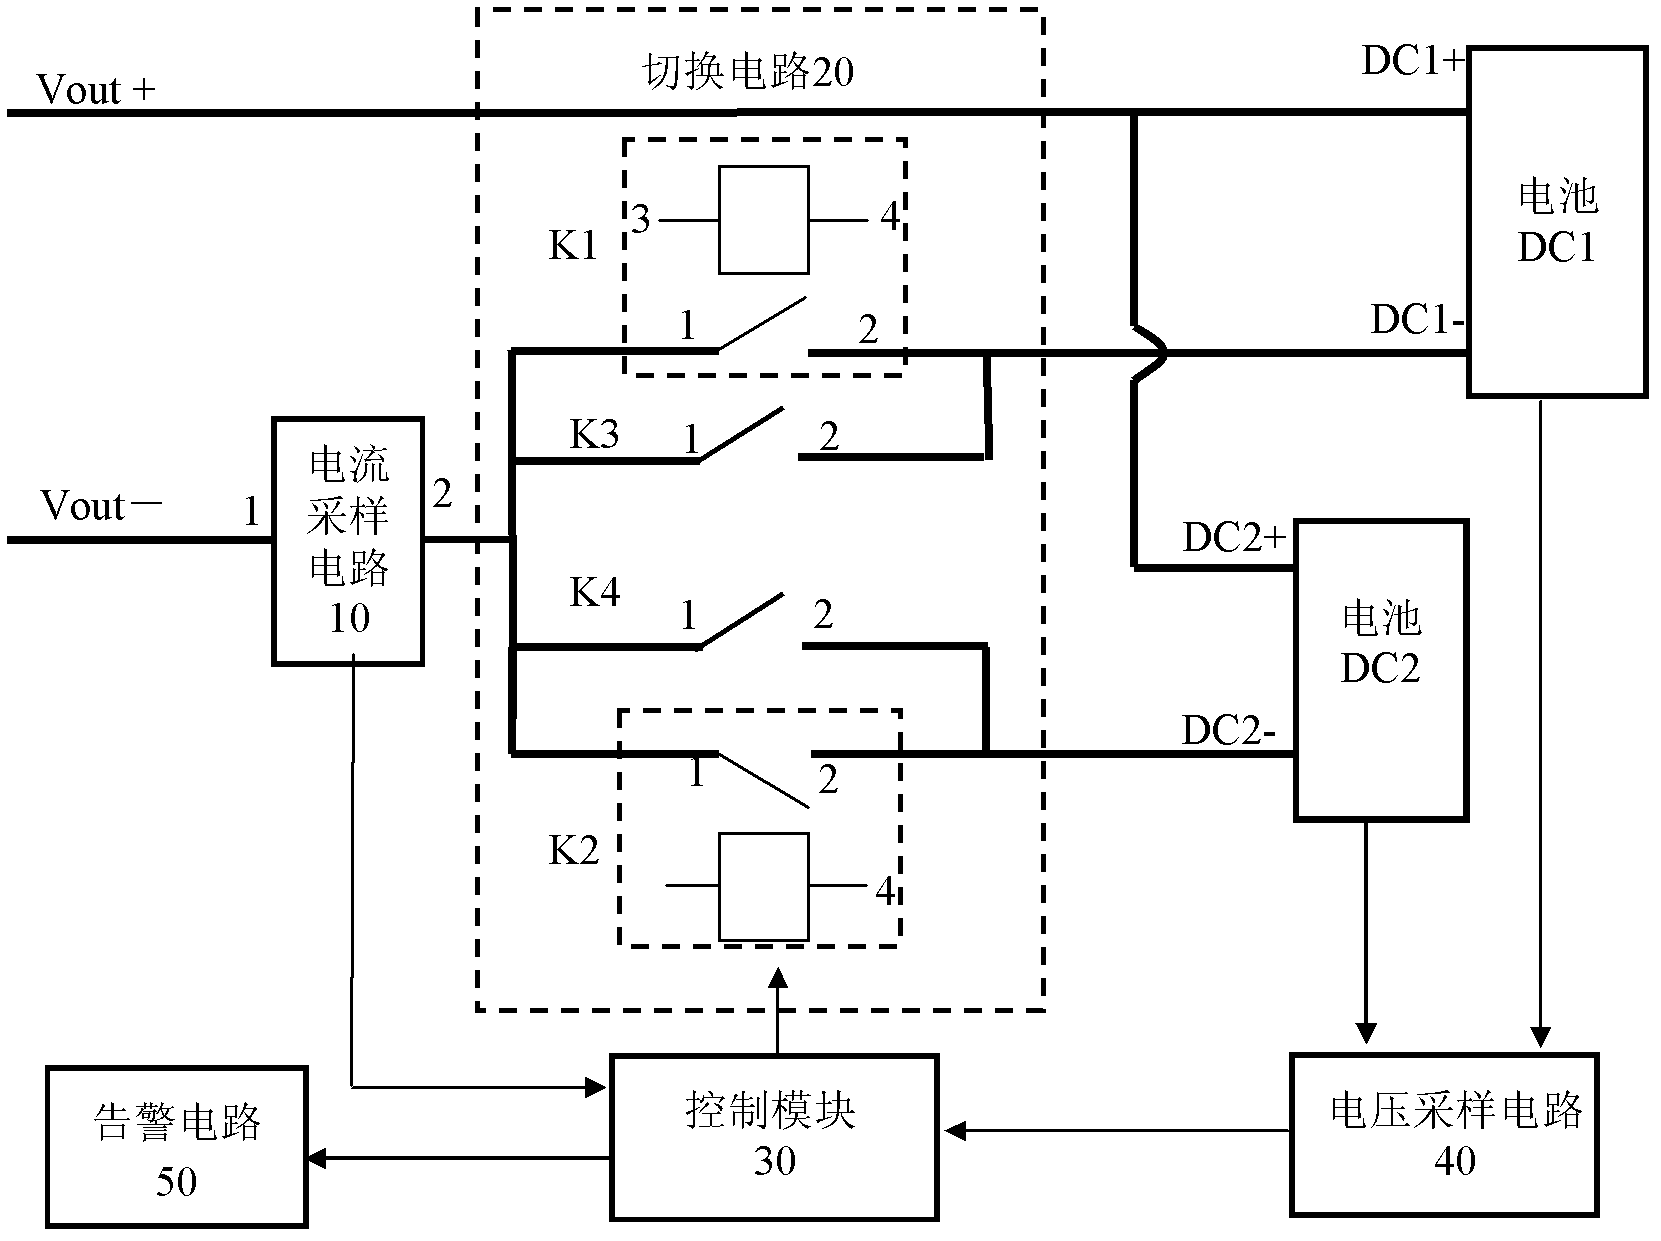 Seamless and circulation-less switching system for two groups of DC (direct current) power supplies